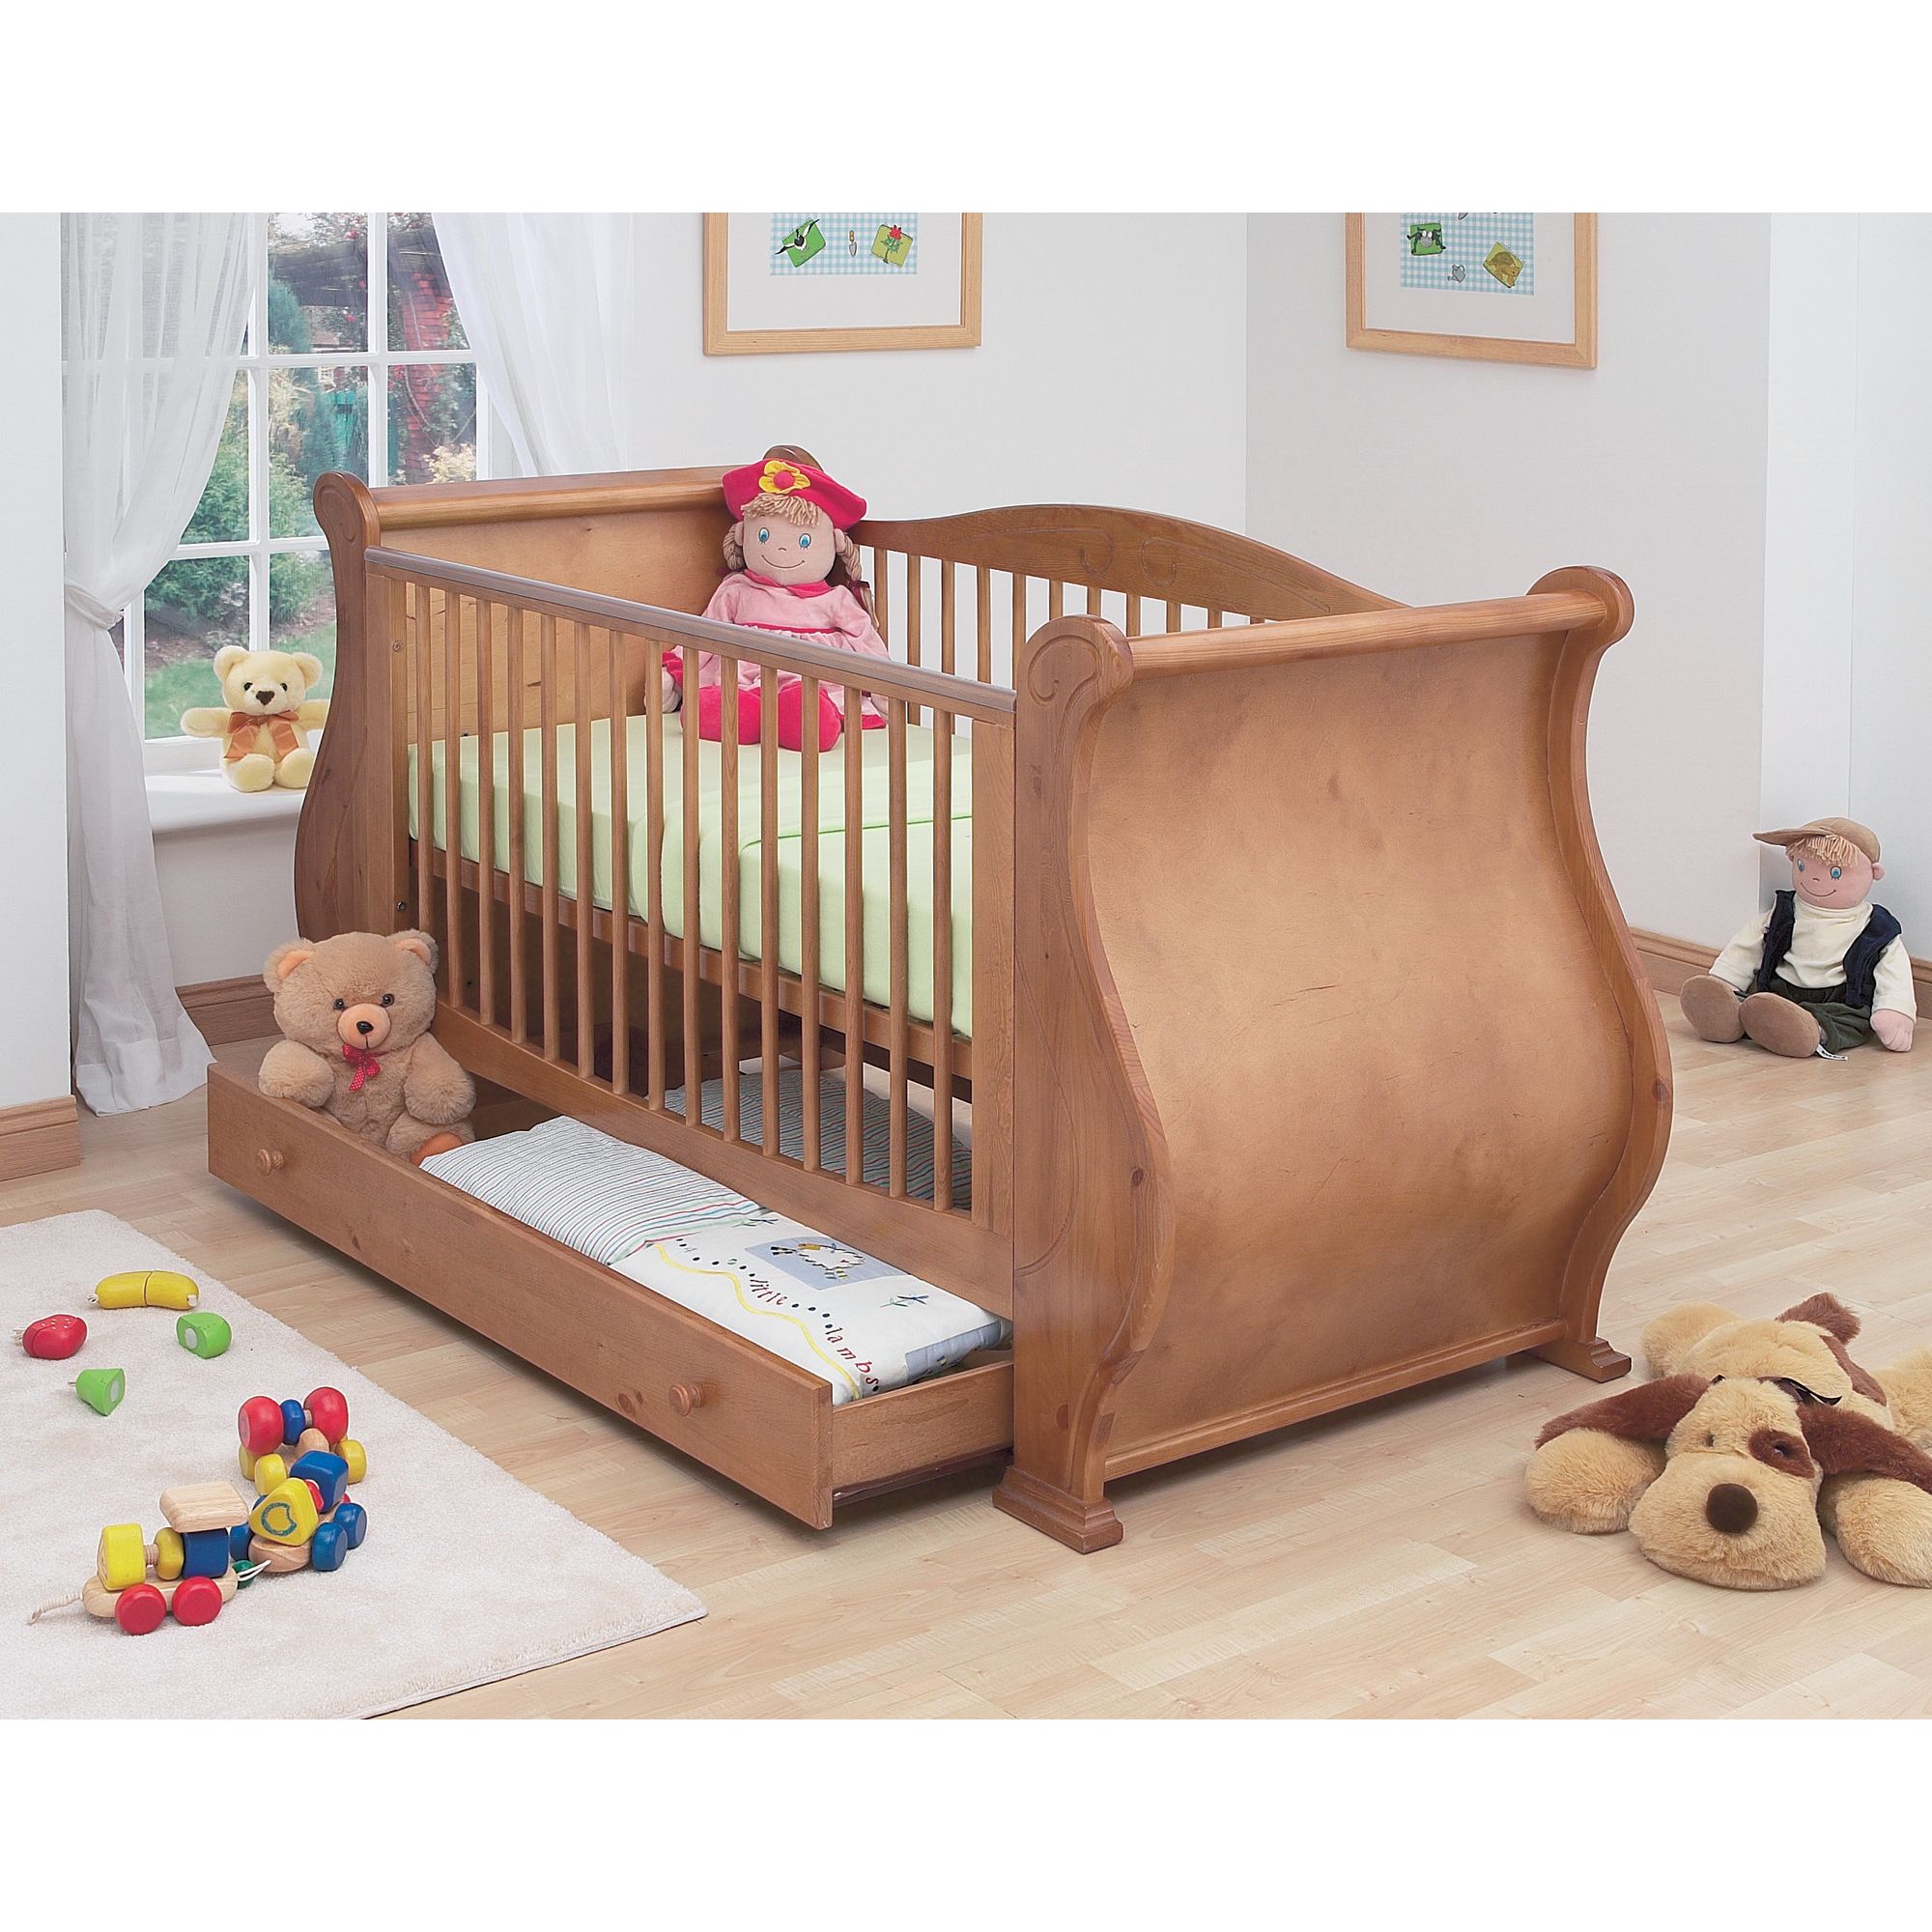 Tutti Bambini Louis Sleigh Cot Bed with Drawer in Old English at Tesco Direct